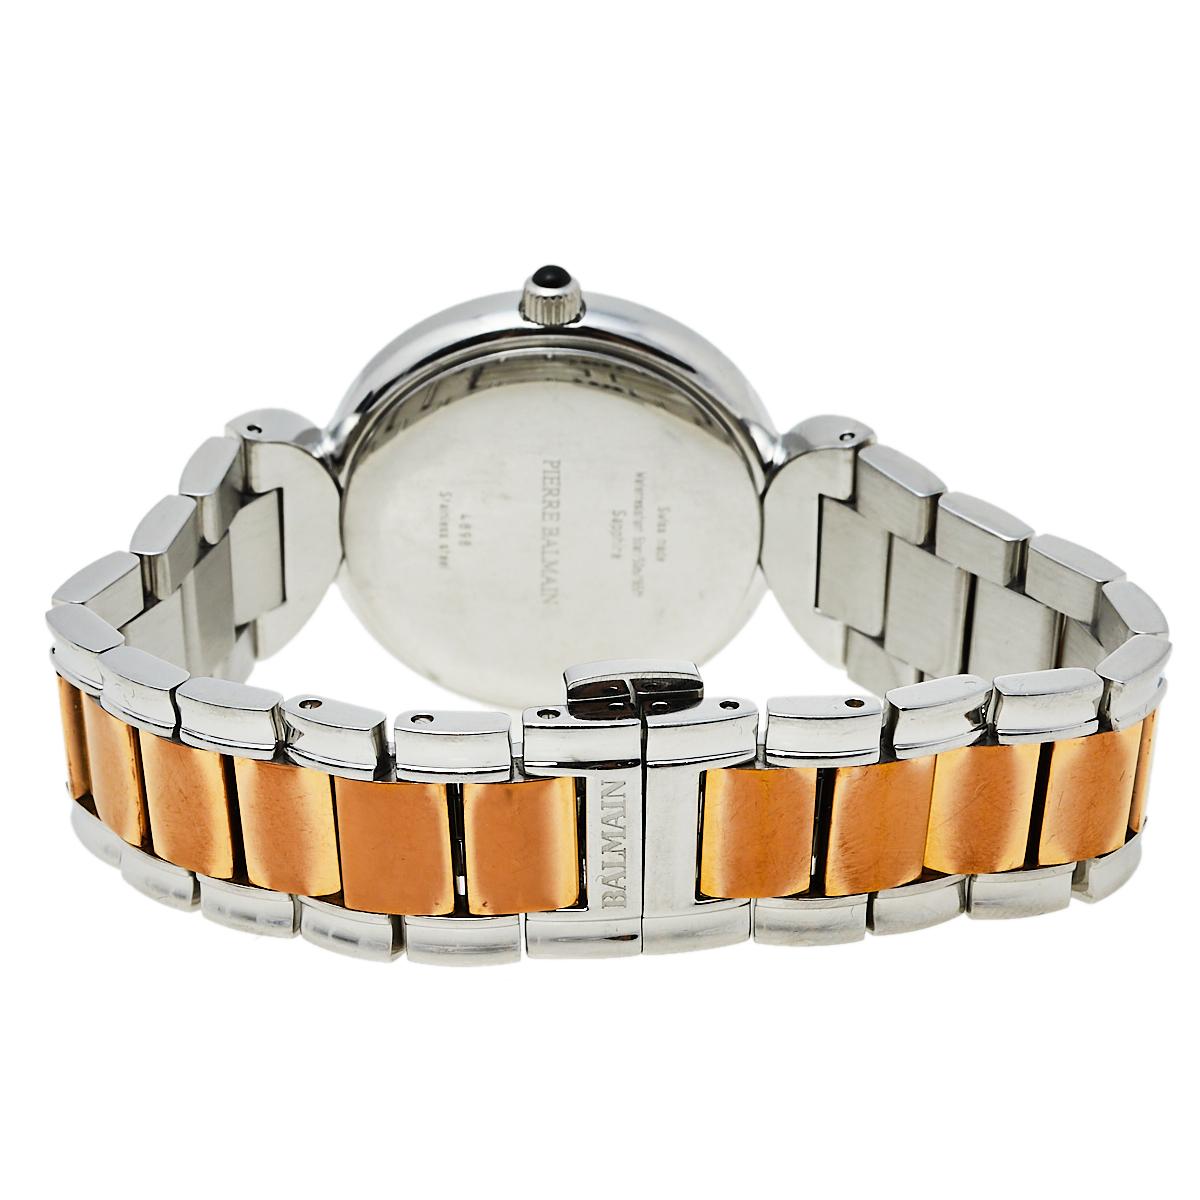 From the Madrigal Lady collection of Balmain comes this elegant watch which is rendered in two-toned stainless steel. It has a rounded gold-plated steel bezel which features a textured dial detailed with stud hour markers and two hands. The